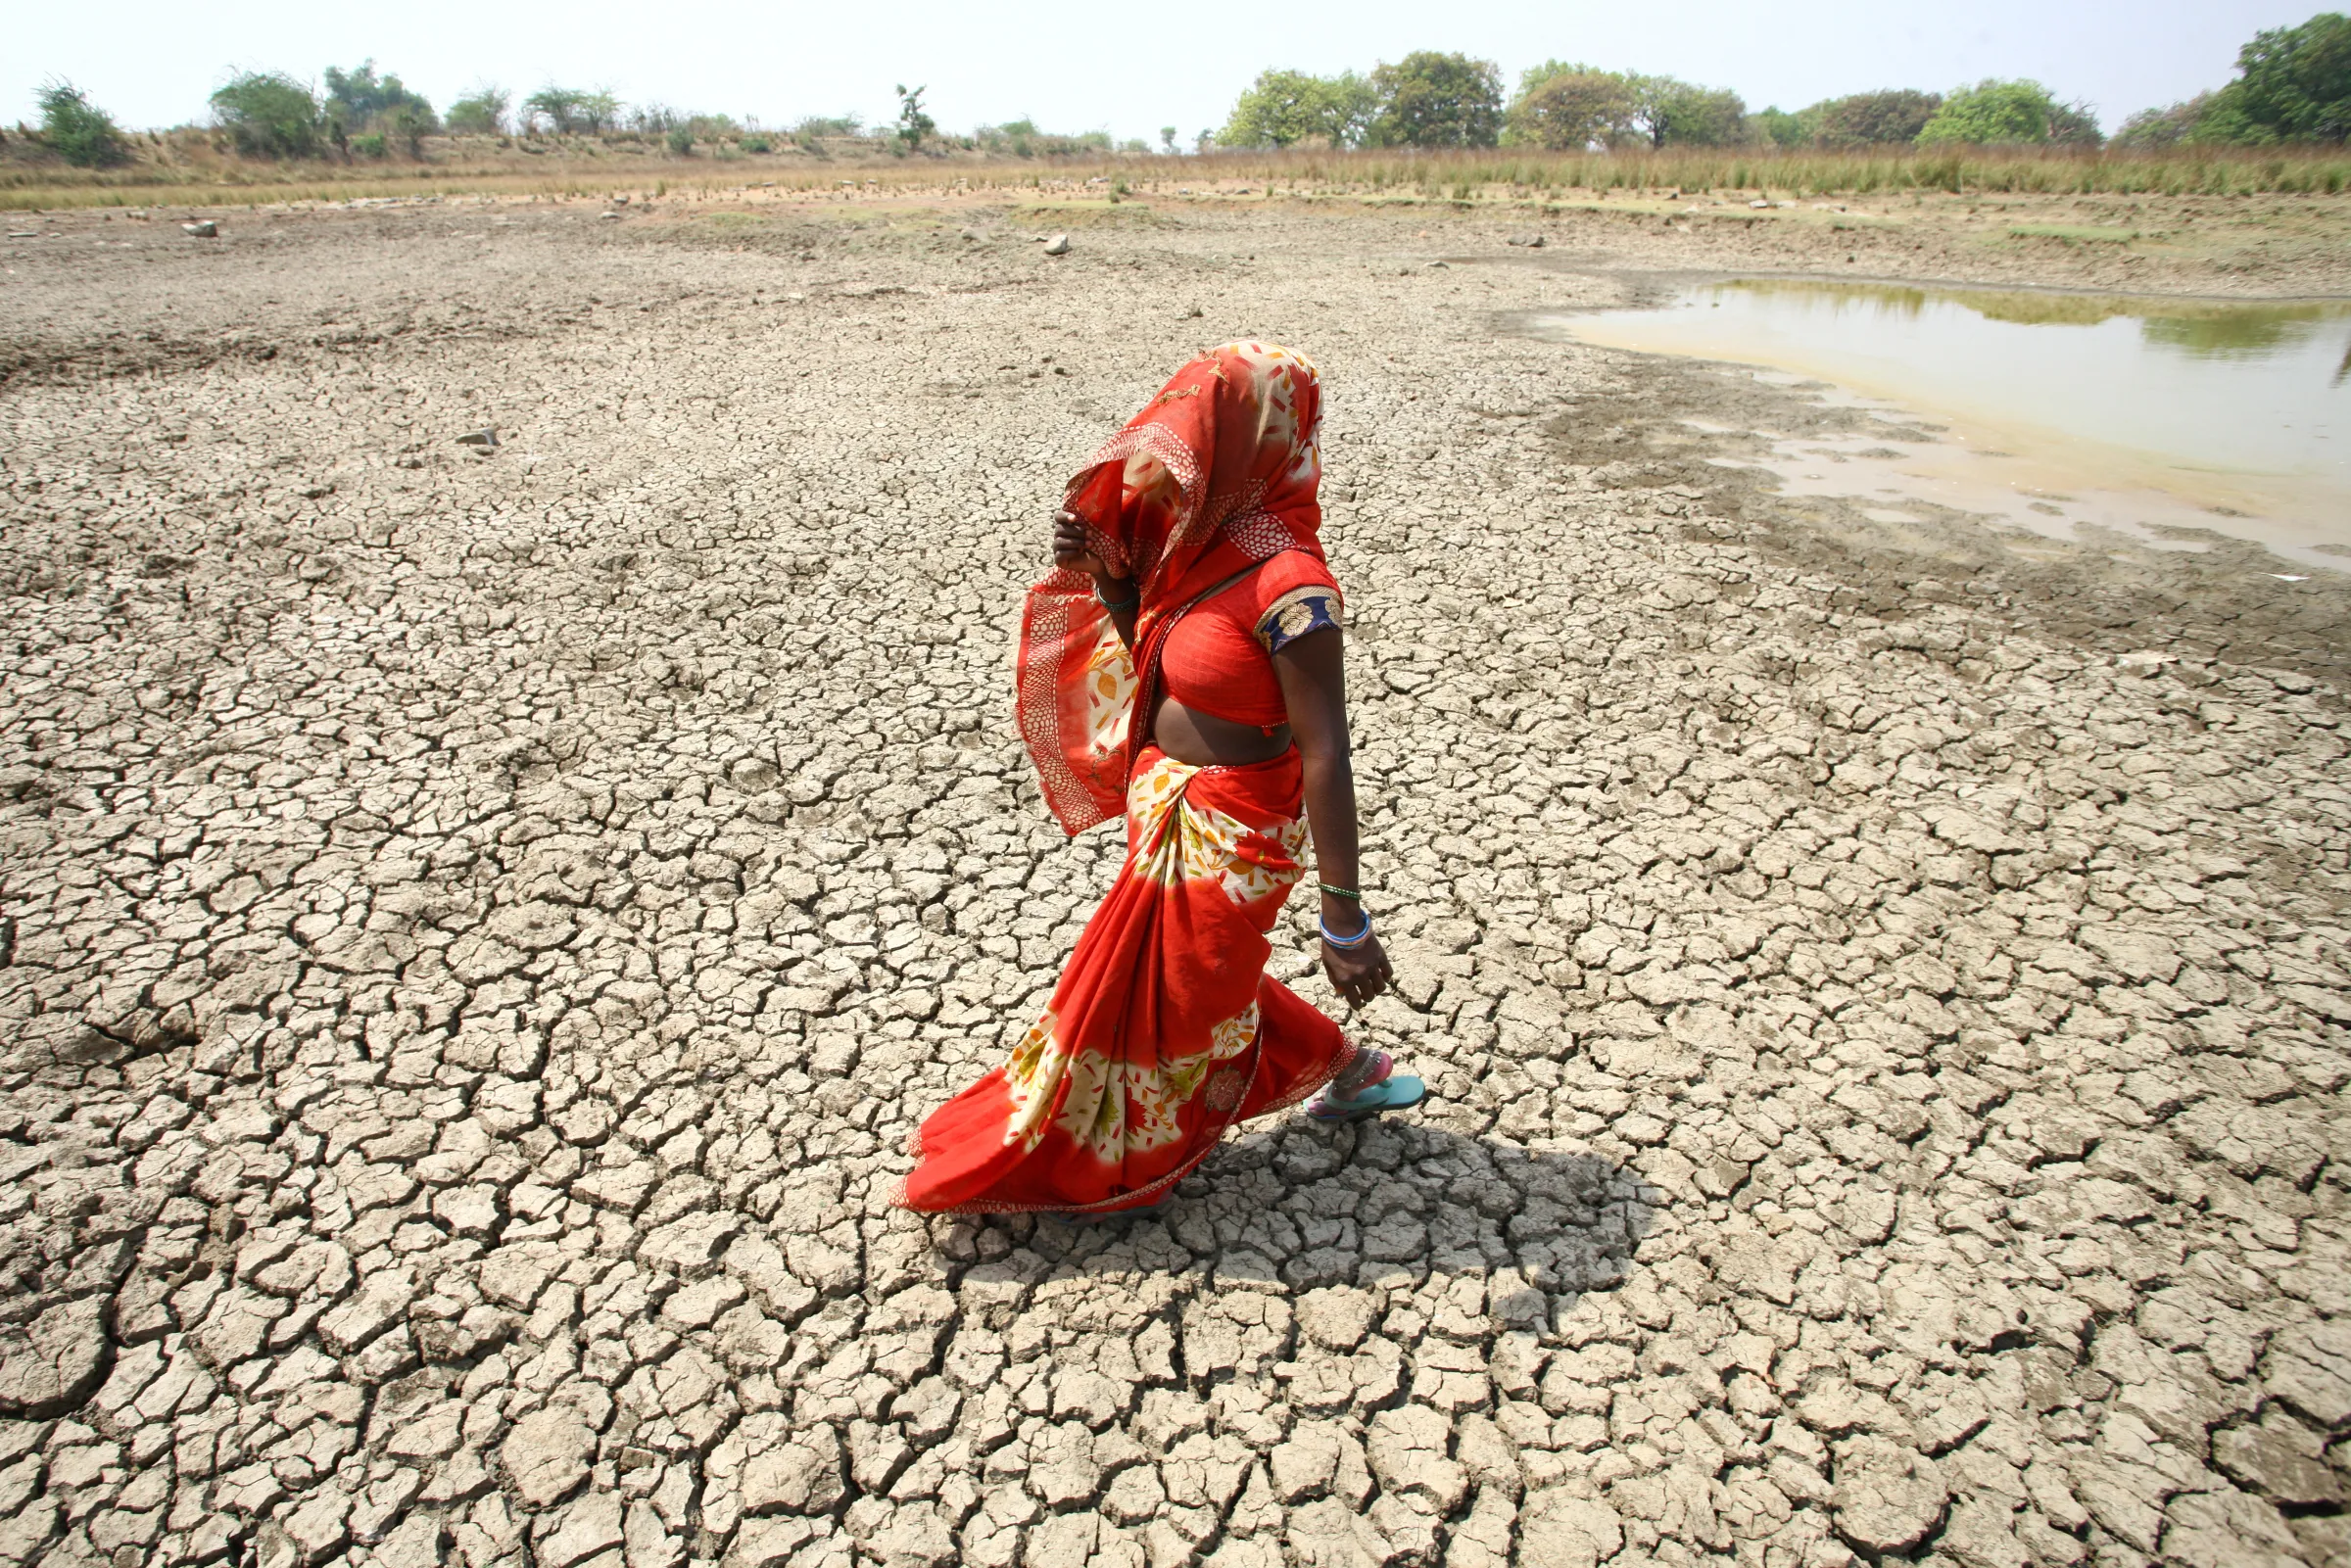 A woman walks on the bottom of a dried pond on a hot day in Mauharia village in the northern state of Uttar Pradesh, India, May 4, 2022